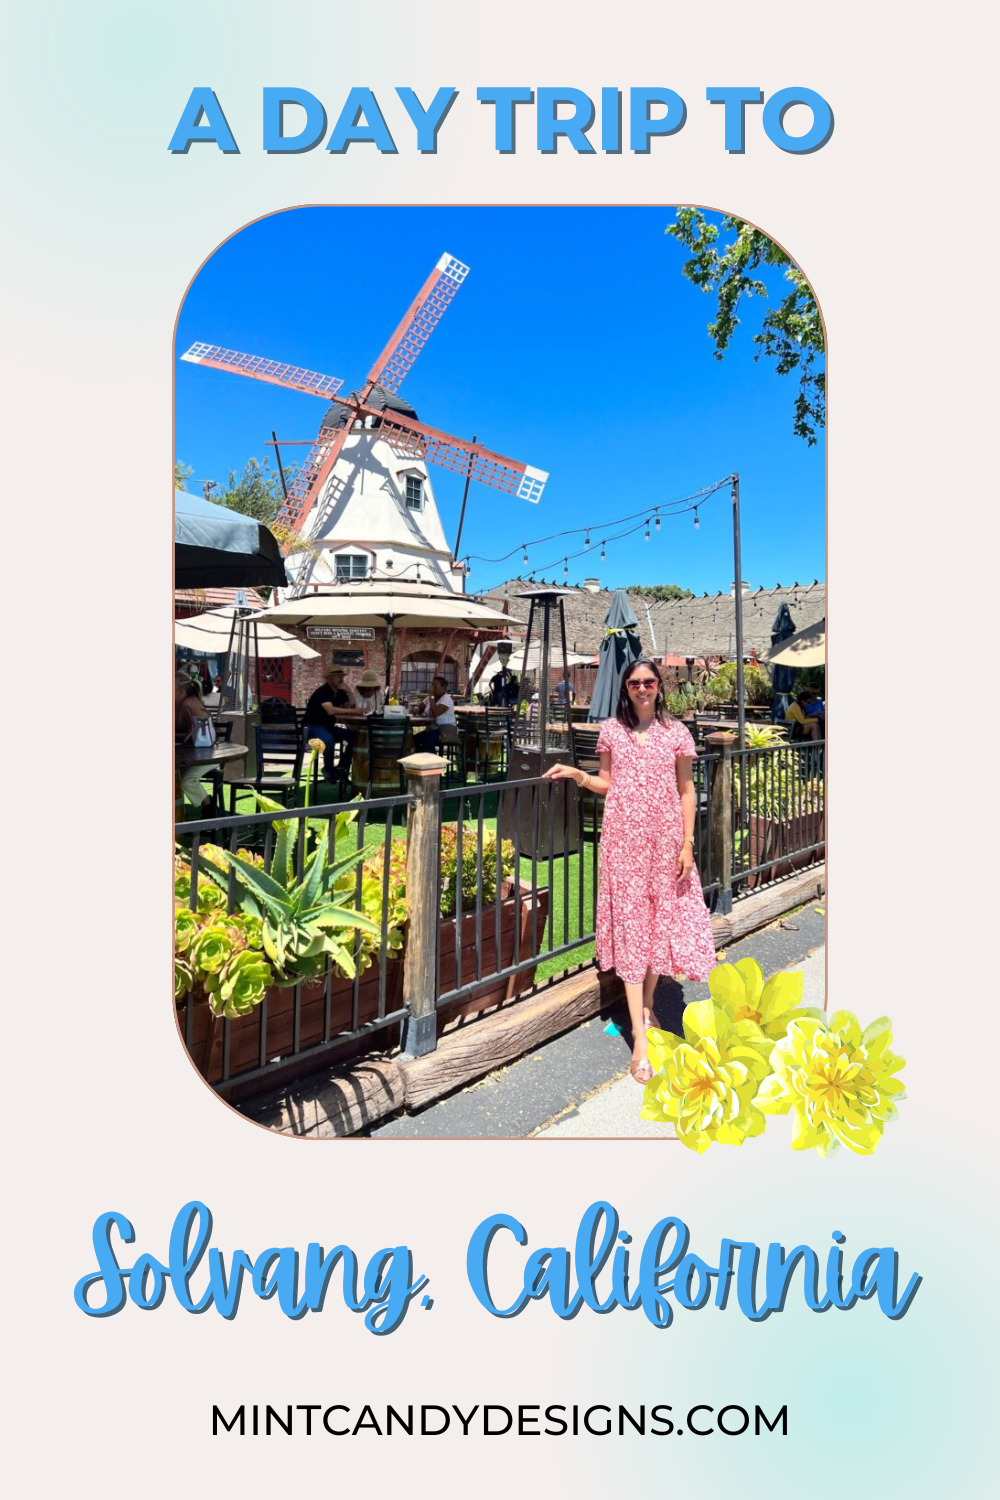 A lady standing in front of windmill in Solvang, California